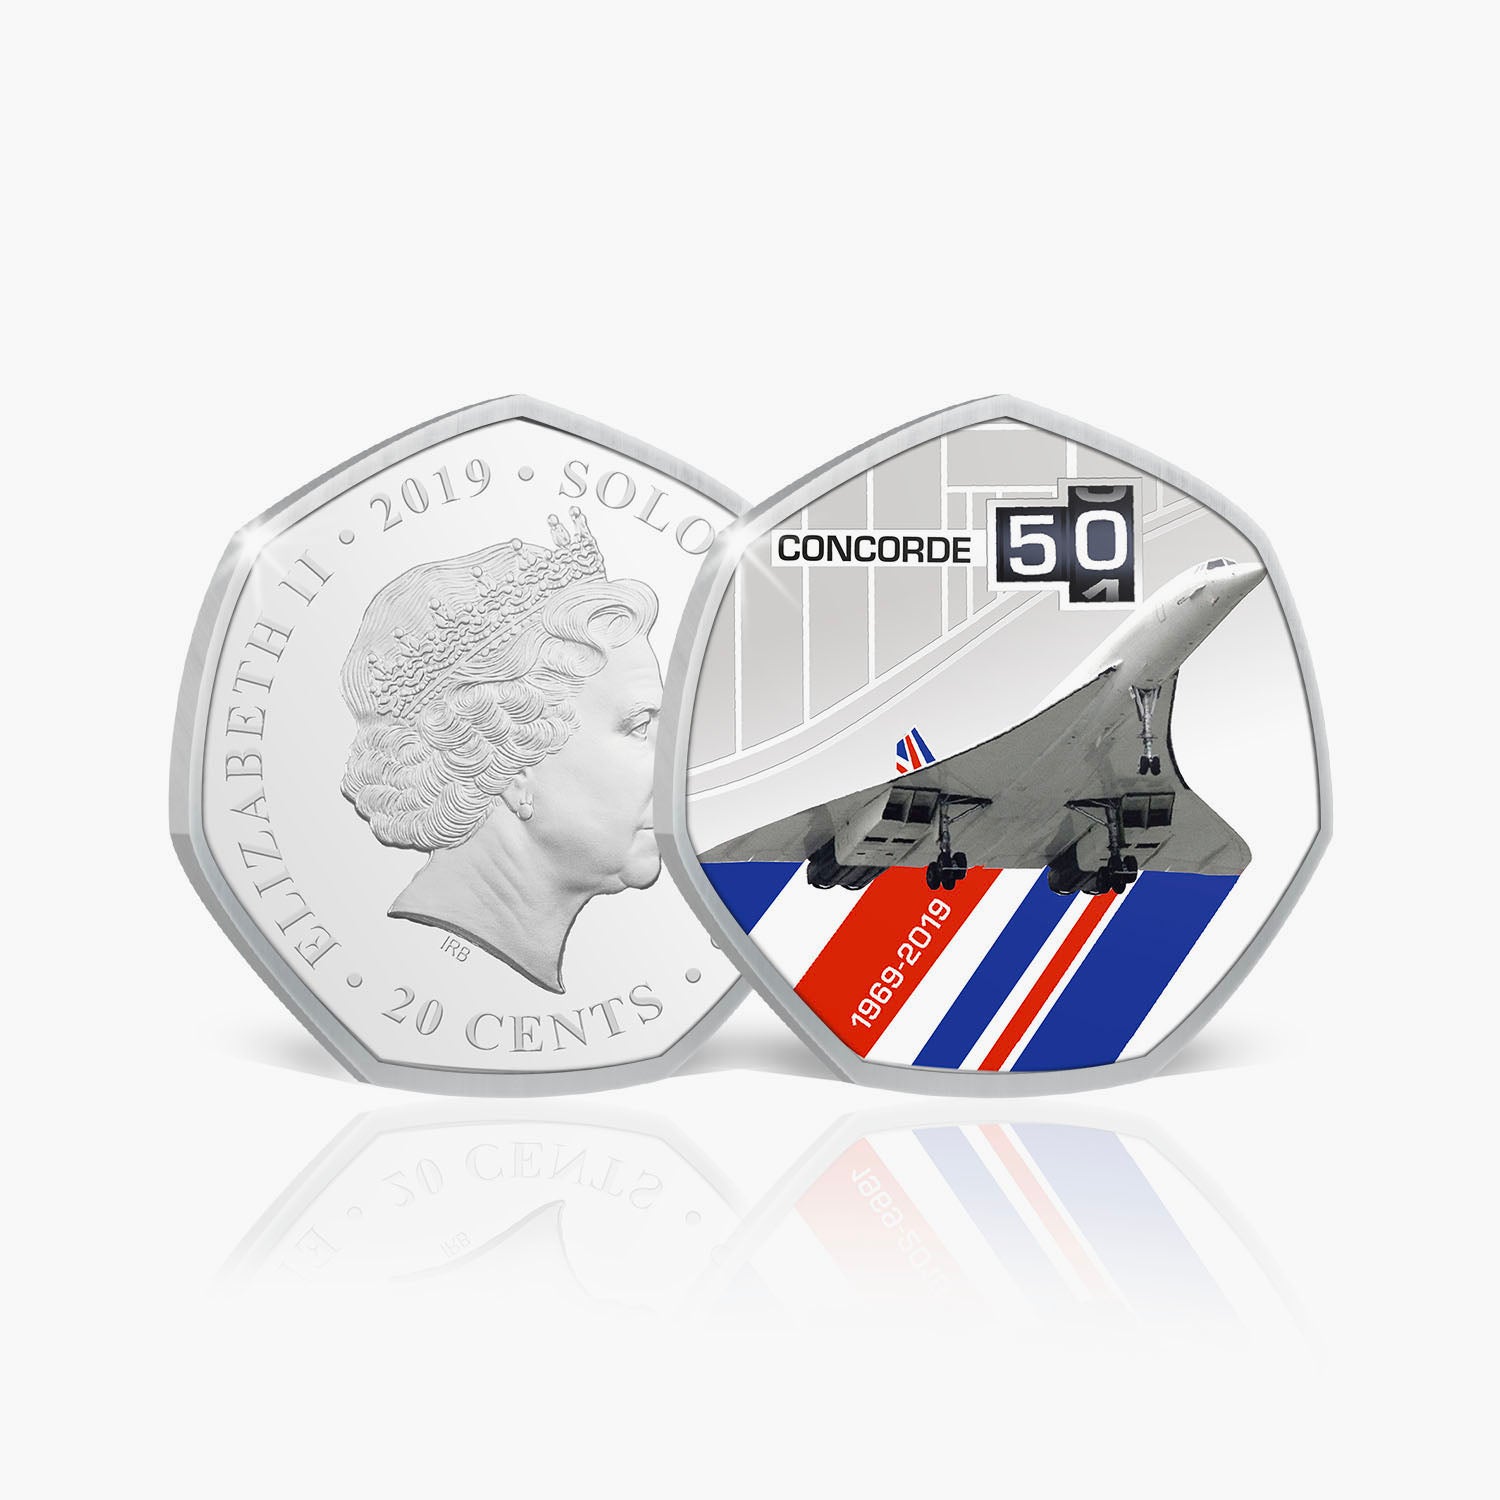 Taking Flight Silver-Plated 20 Cents Coin